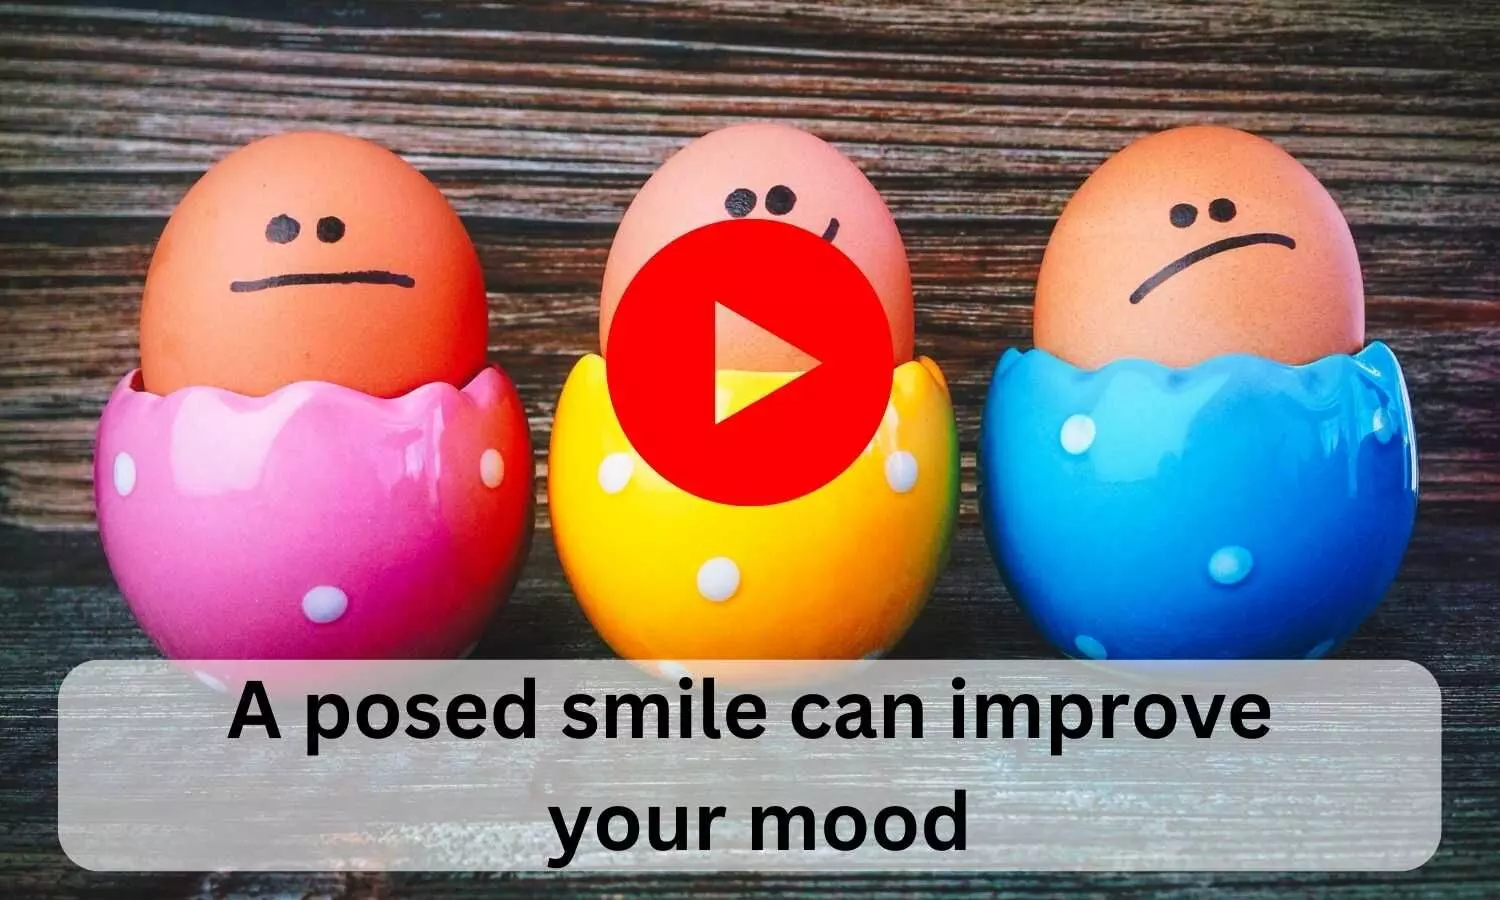 A posed smile can improve your mood